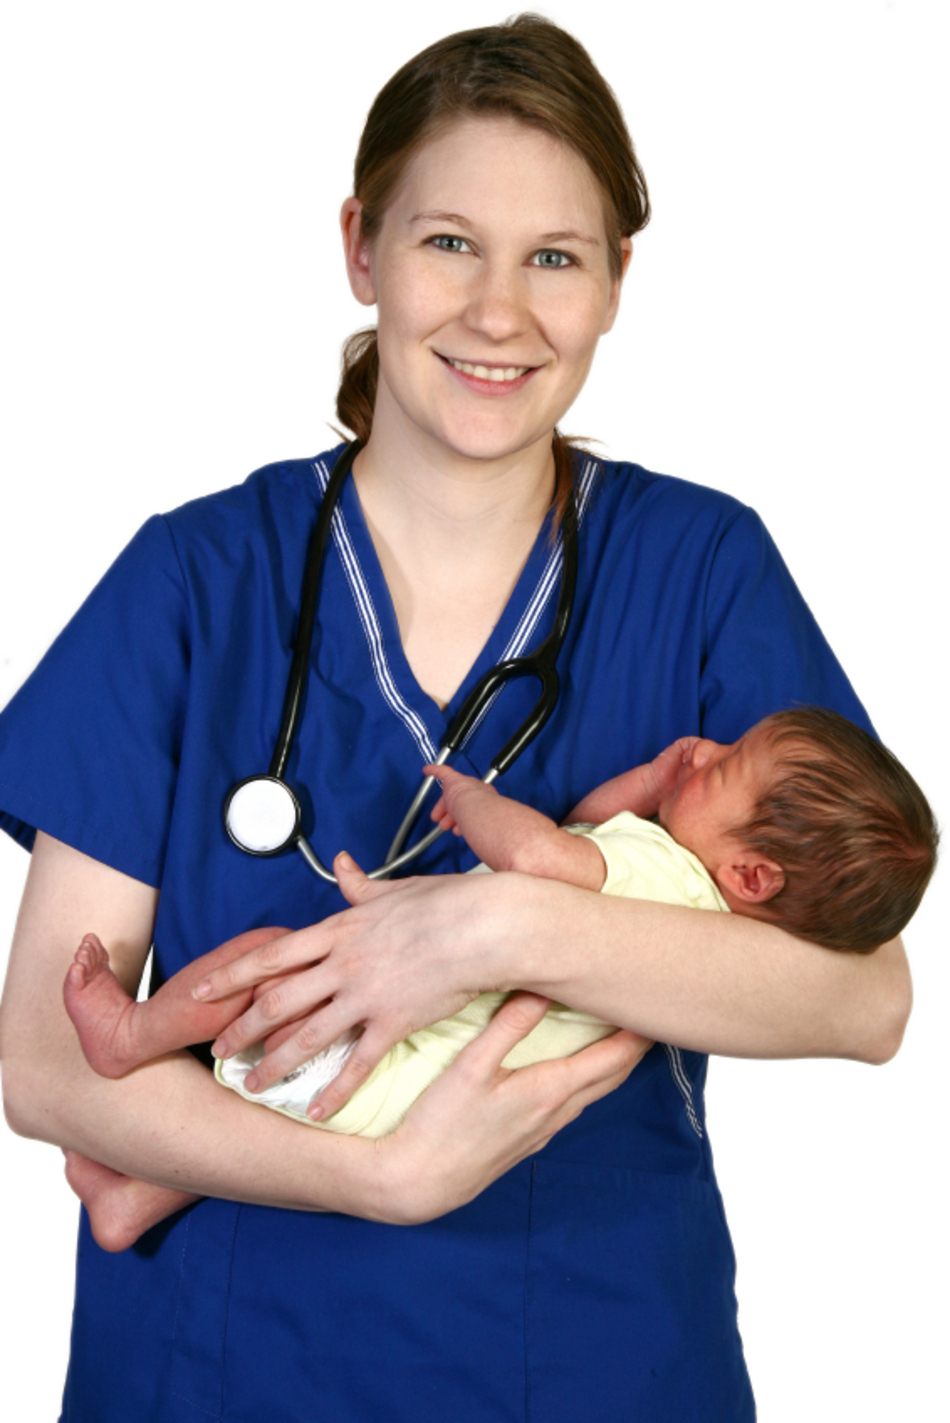 Why Choose A Midwife?